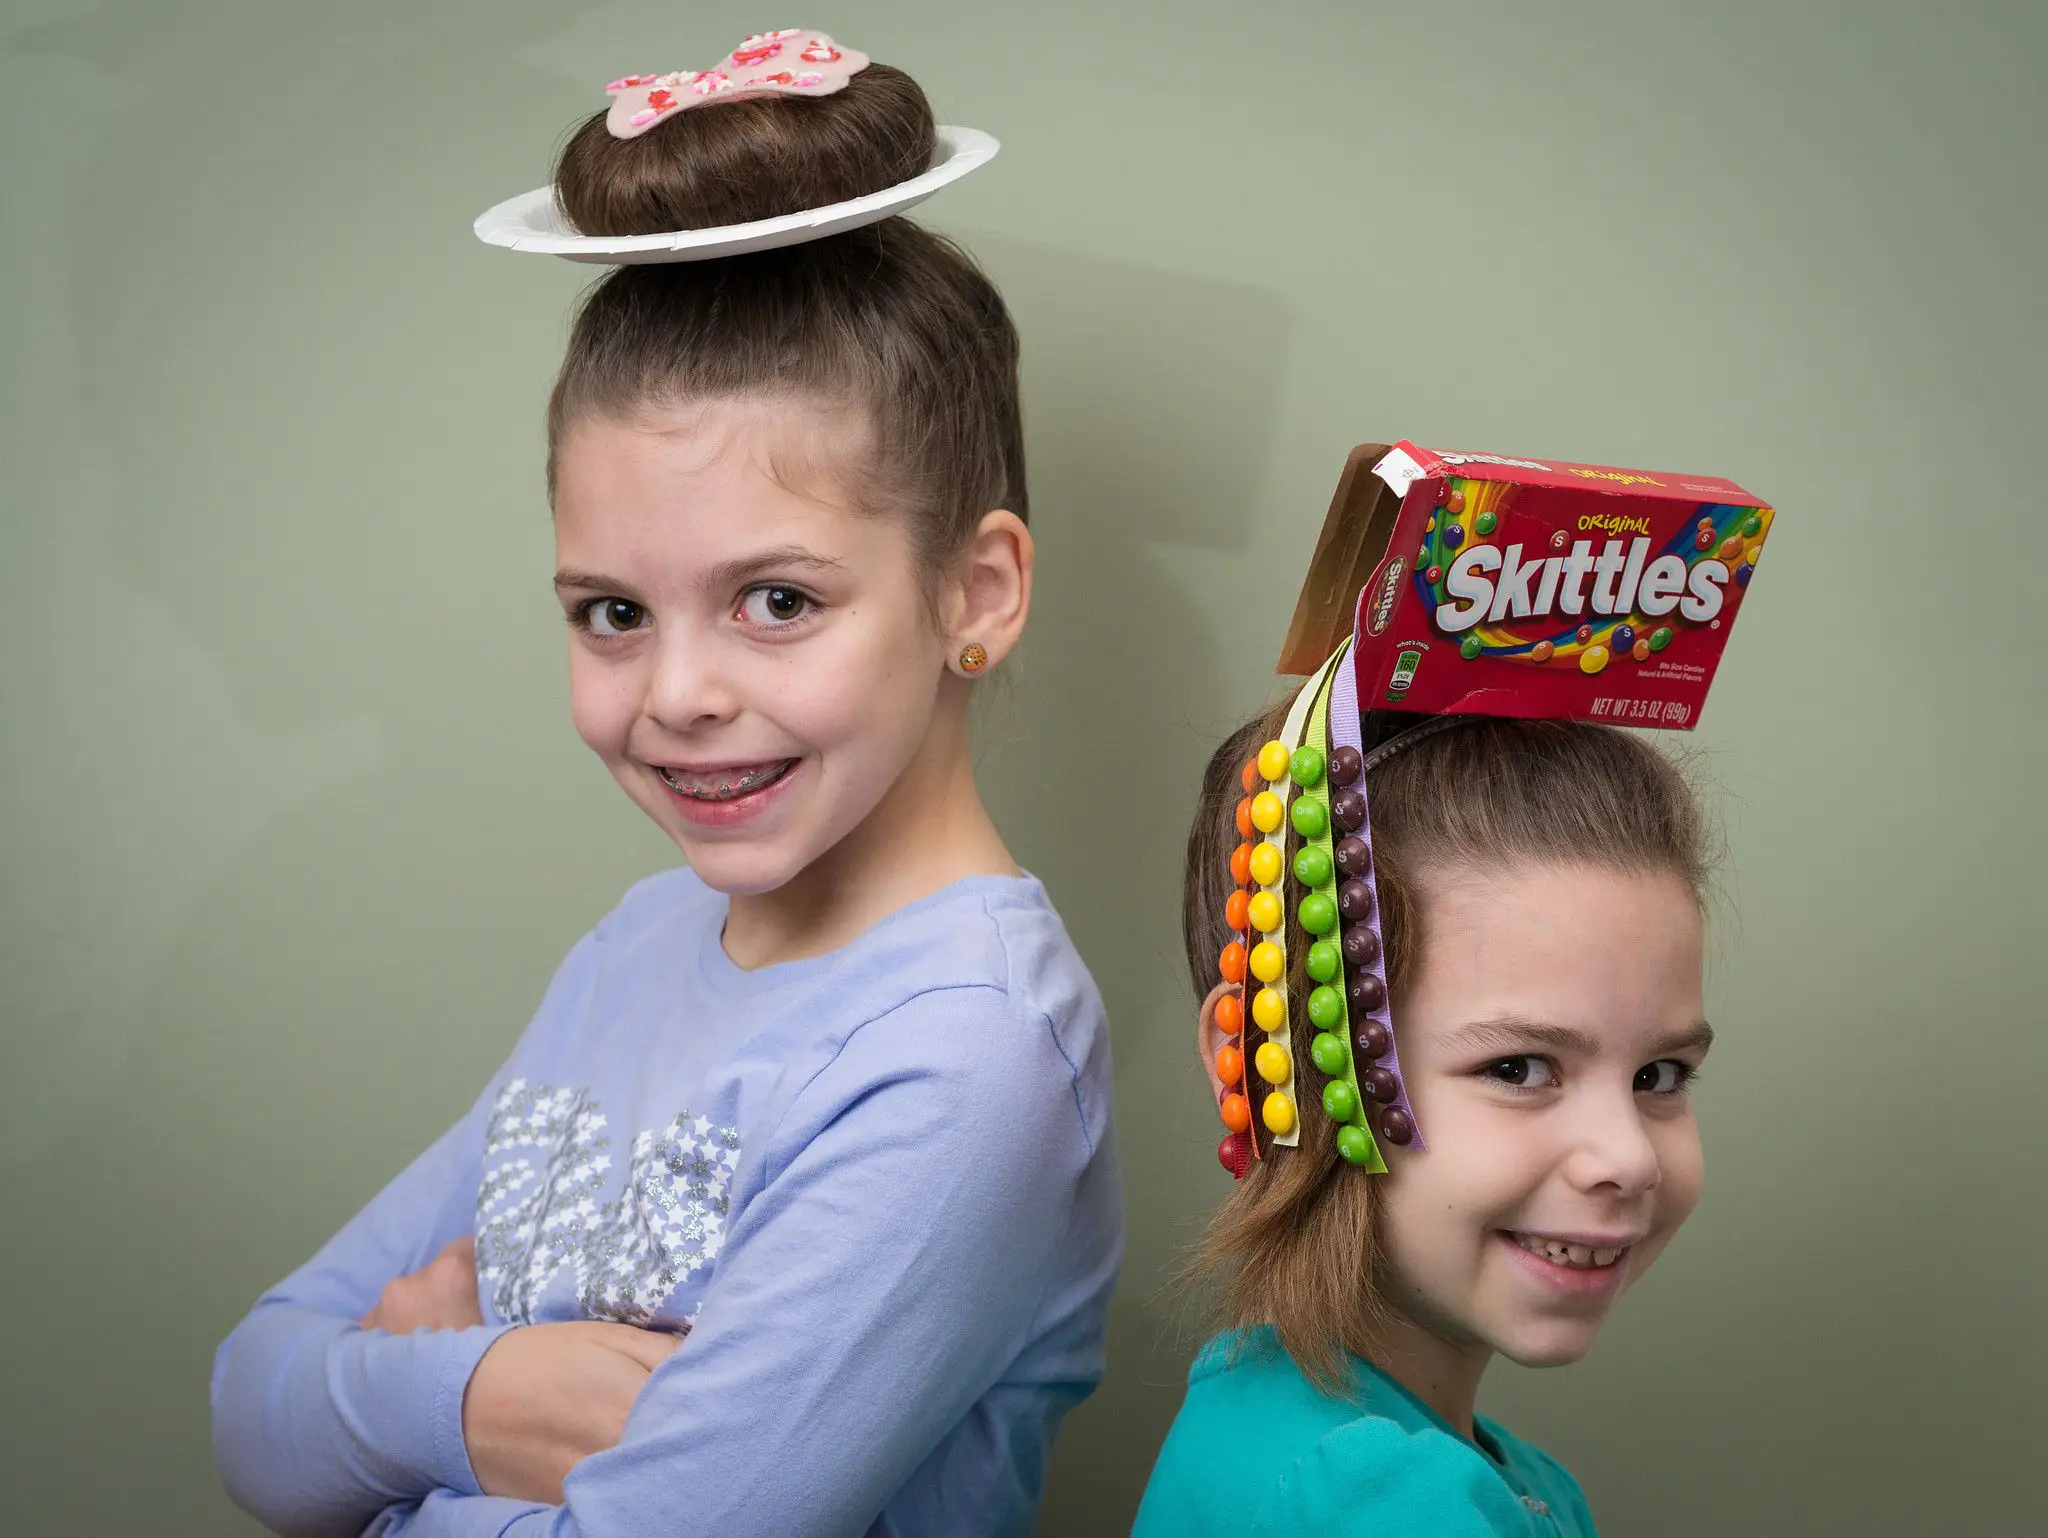 65-crazy-hair-day-ideas-wacky-boys-and-038-girls-hairstyles-for-school Skittles Hair